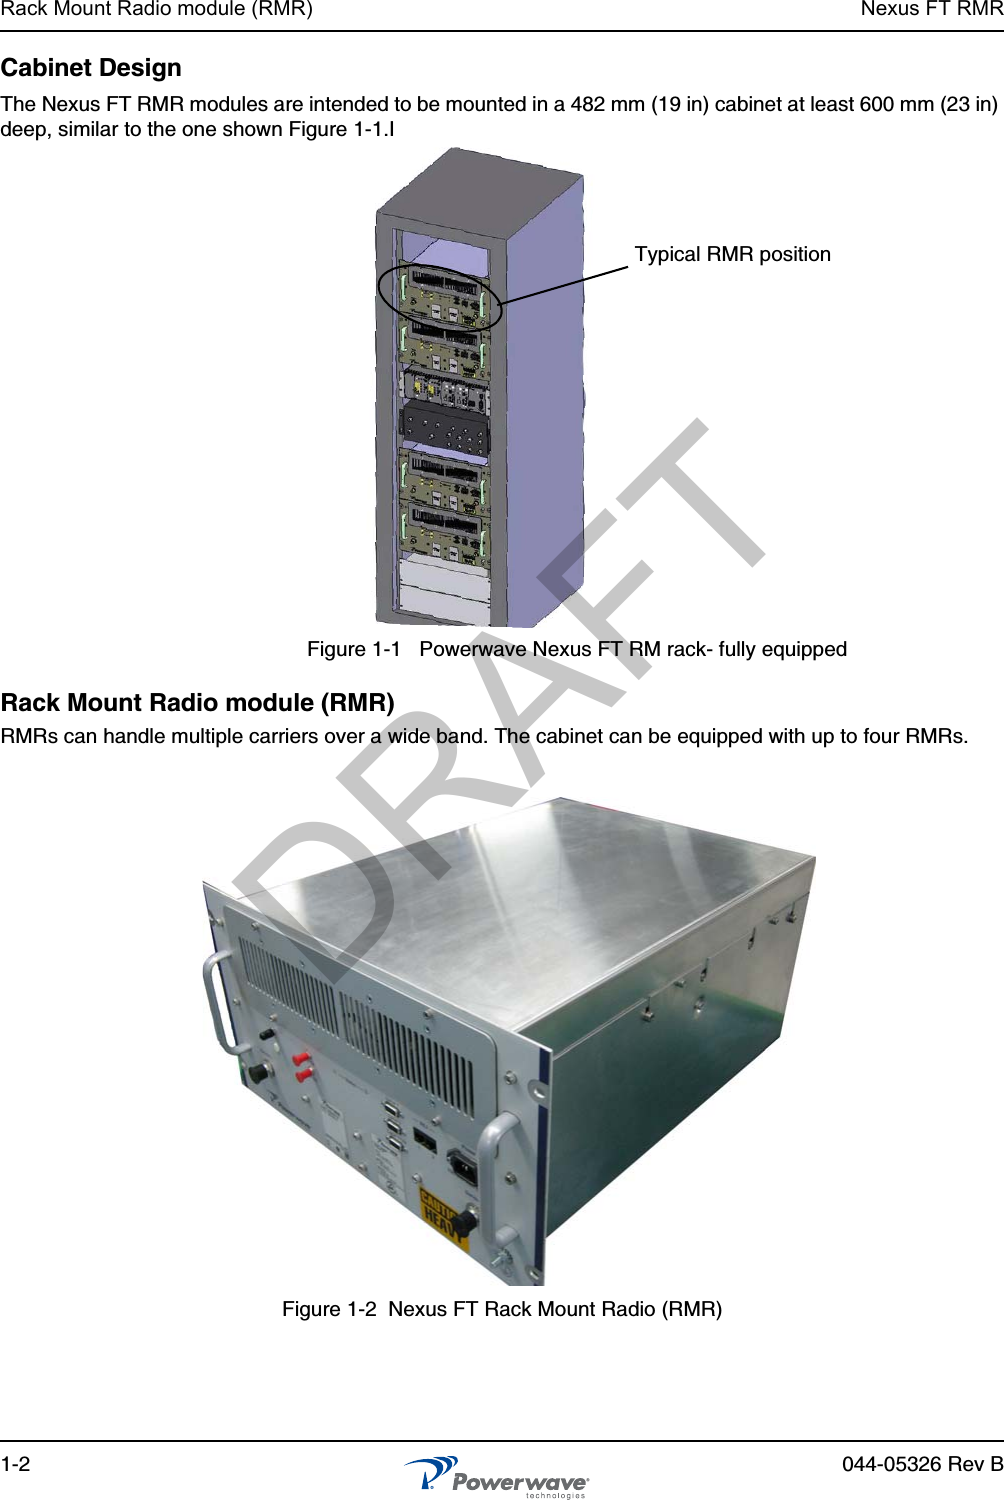 Rack Mount Radio module (RMR) Nexus FT RMR1-2 044-05326 Rev BCabinet DesignThe Nexus FT RMR modules are intended to be mounted in a 482 mm (19 in) cabinet at least 600 mm (23 in) deep, similar to the one shown Figure 1-1.IFigure 1-1   Powerwave Nexus FT RM rack- fully equippedRack Mount Radio module (RMR) RMRs can handle multiple carriers over a wide band. The cabinet can be equipped with up to four RMRs.Figure 1-2  Nexus FT Rack Mount Radio (RMR) Typical RMR positionDRAFT